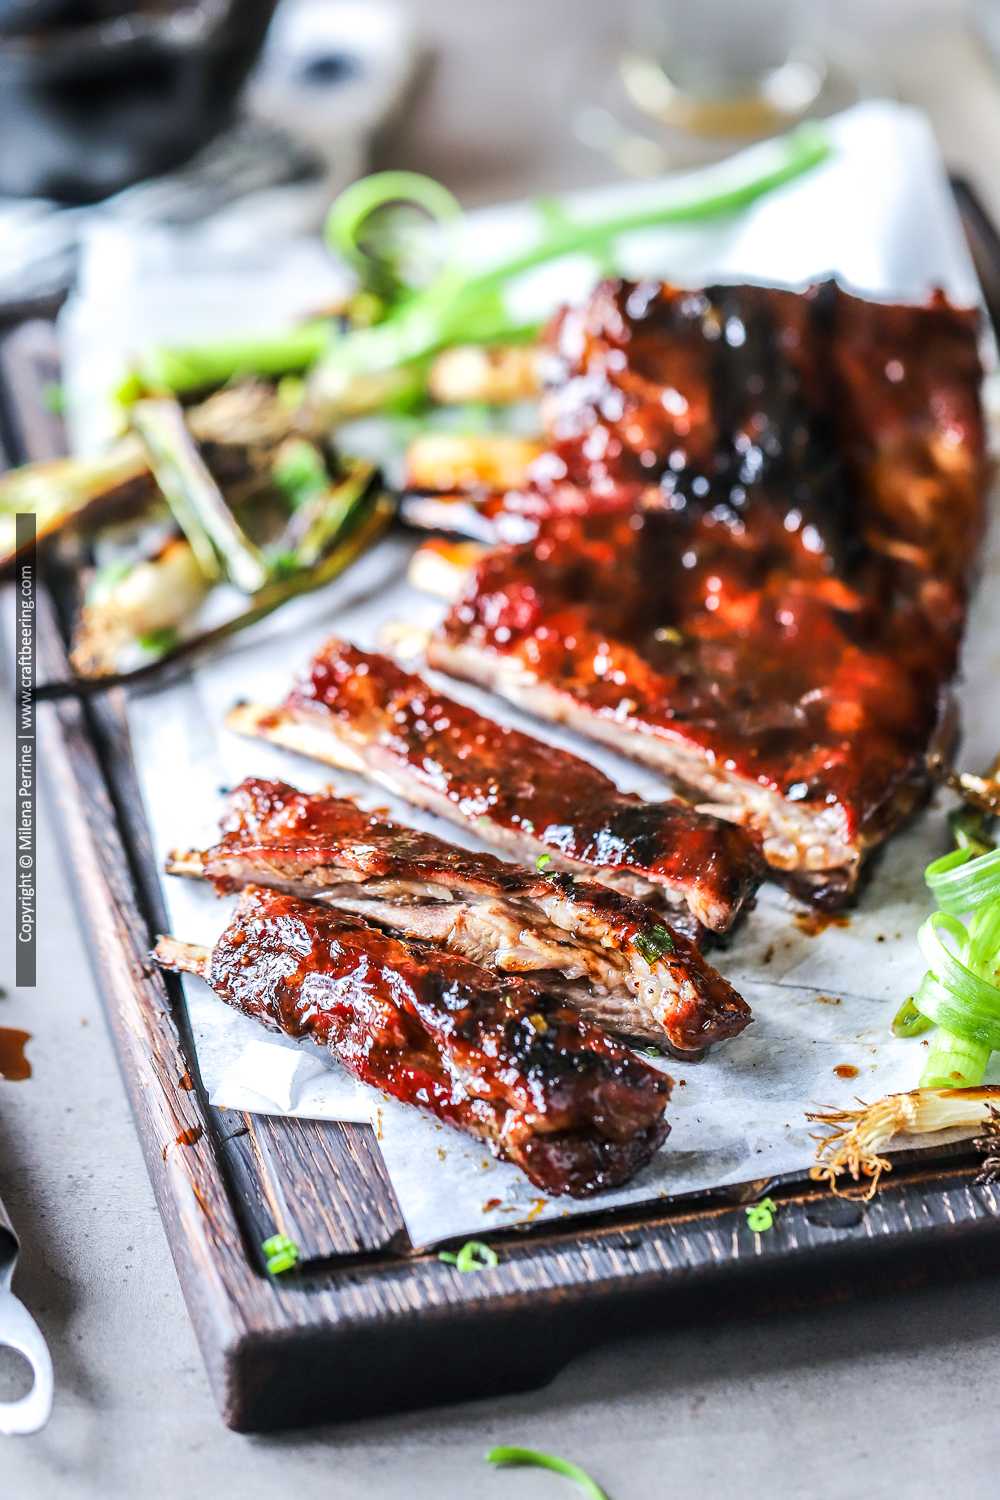 Grilled lamb ribs with hoisin barbecue sauce.